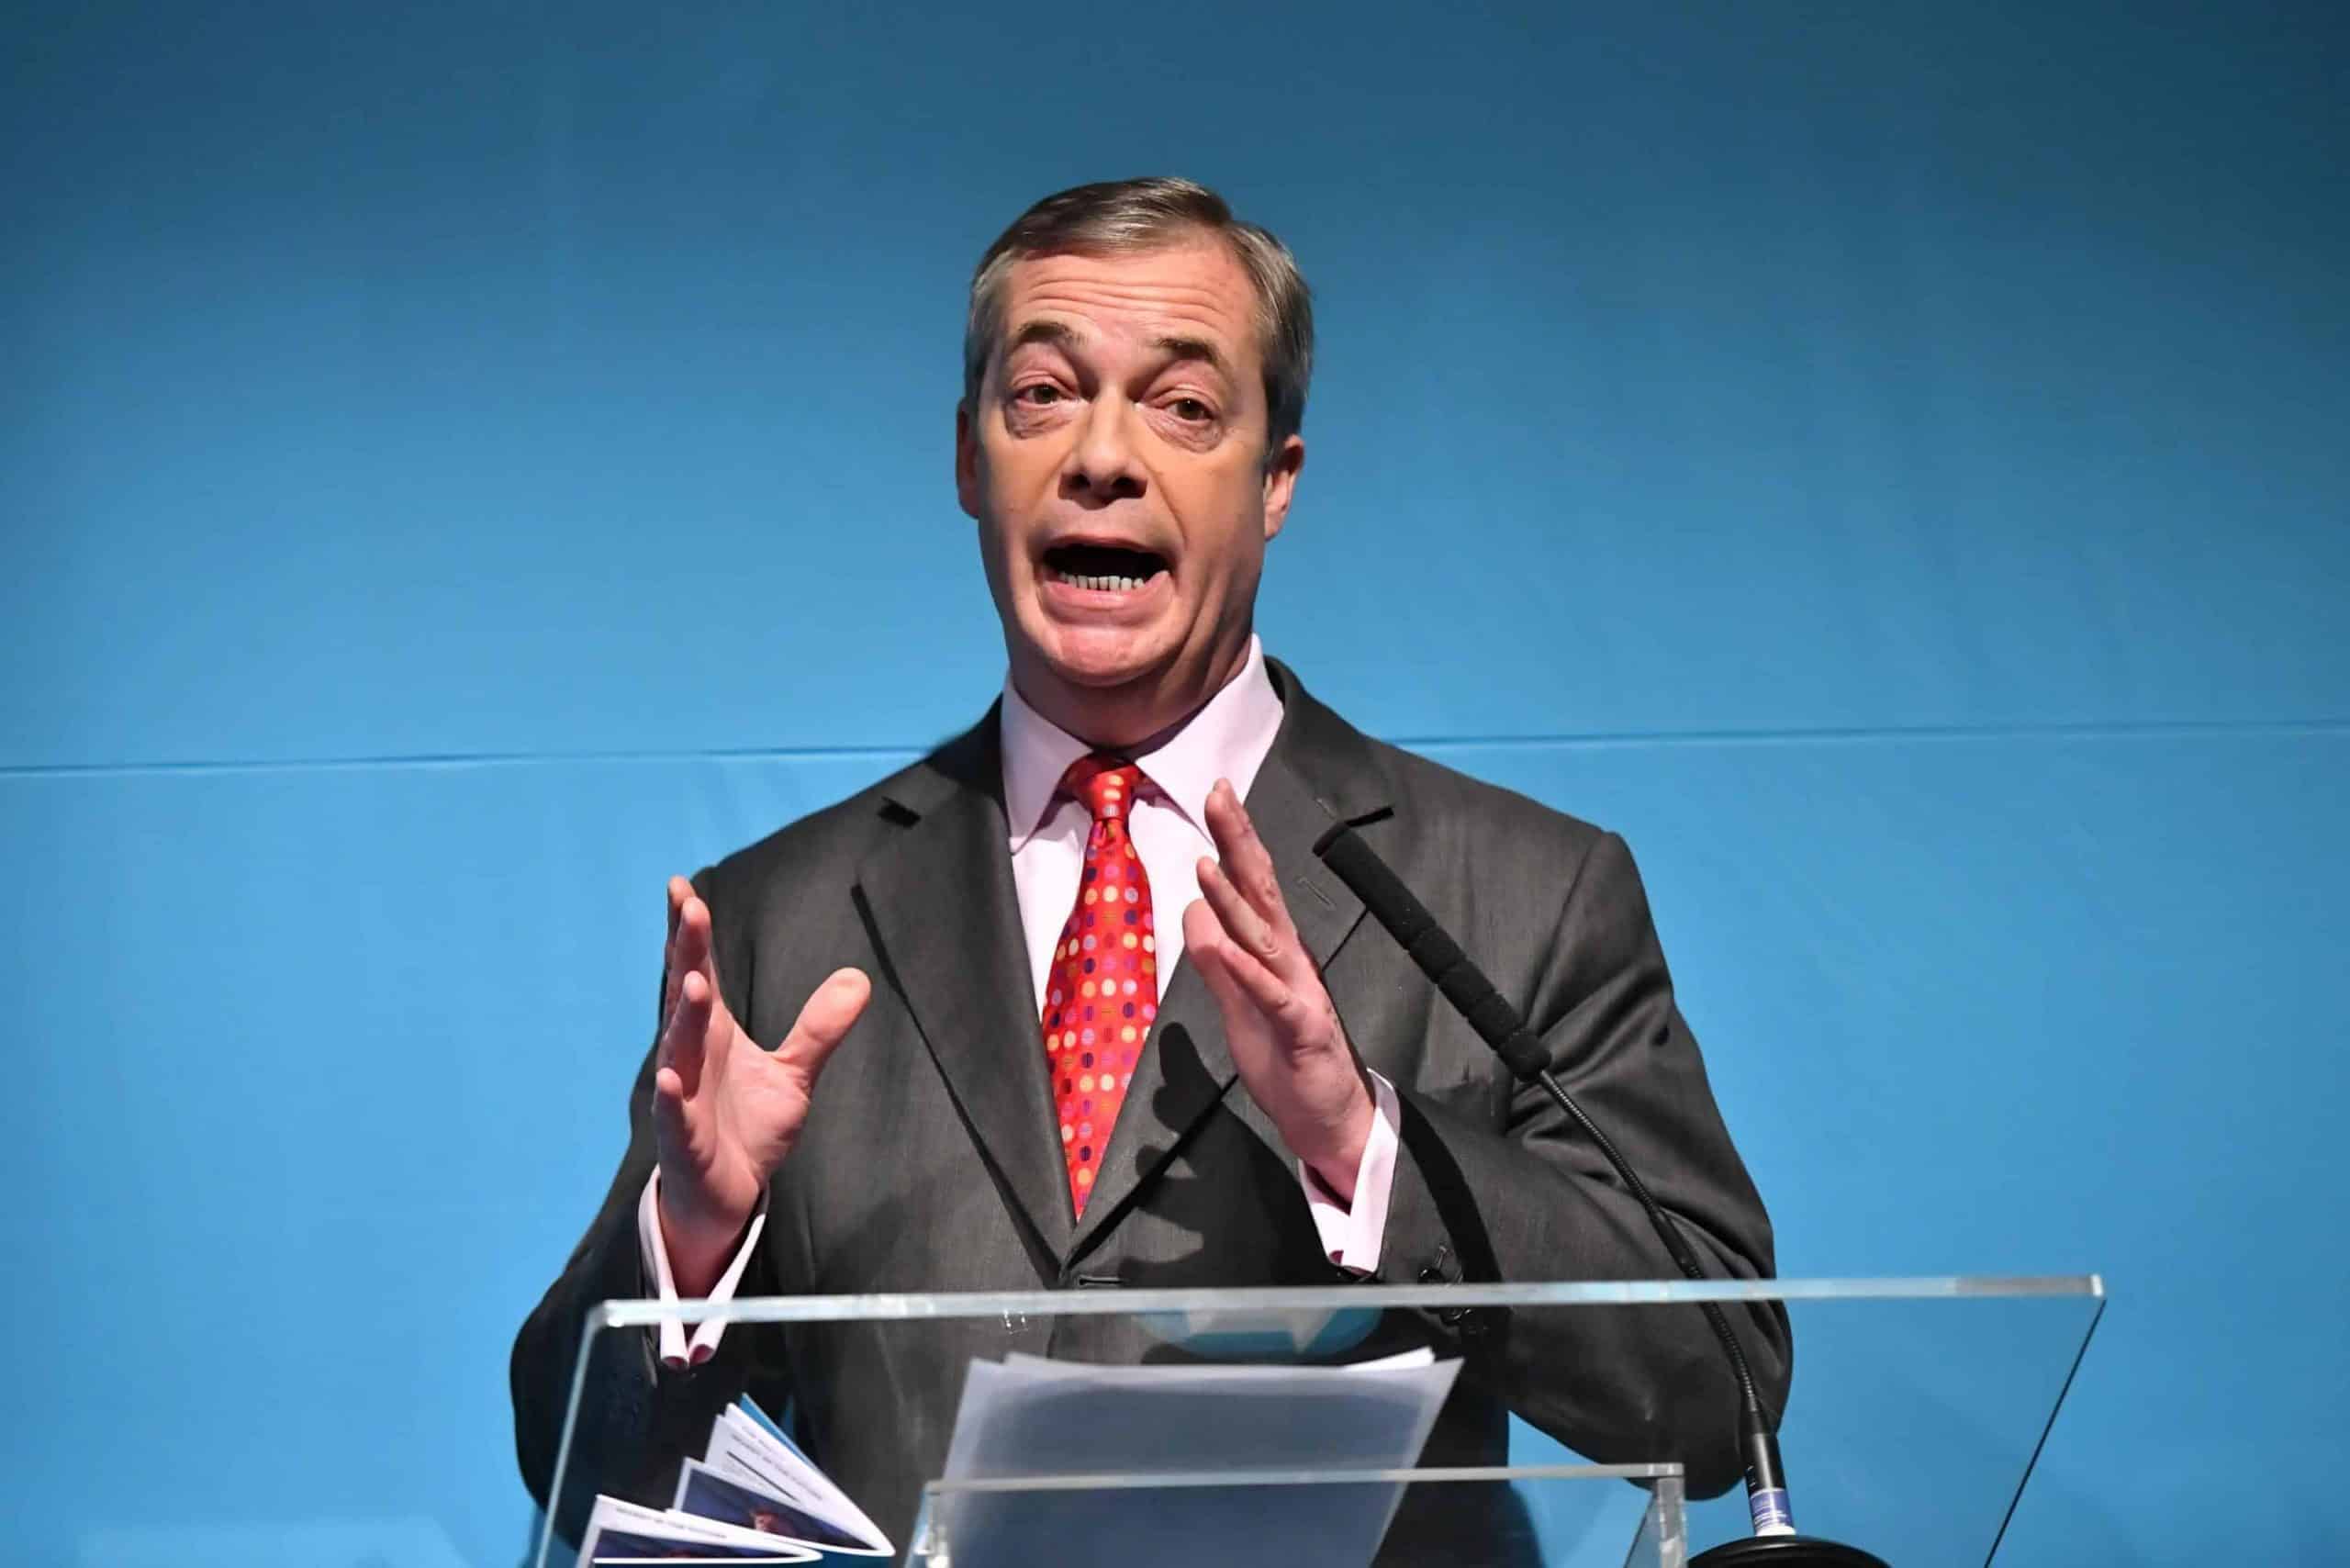 ‘Absolutely’ right to mention London Bridge attack during campaign, says Farage